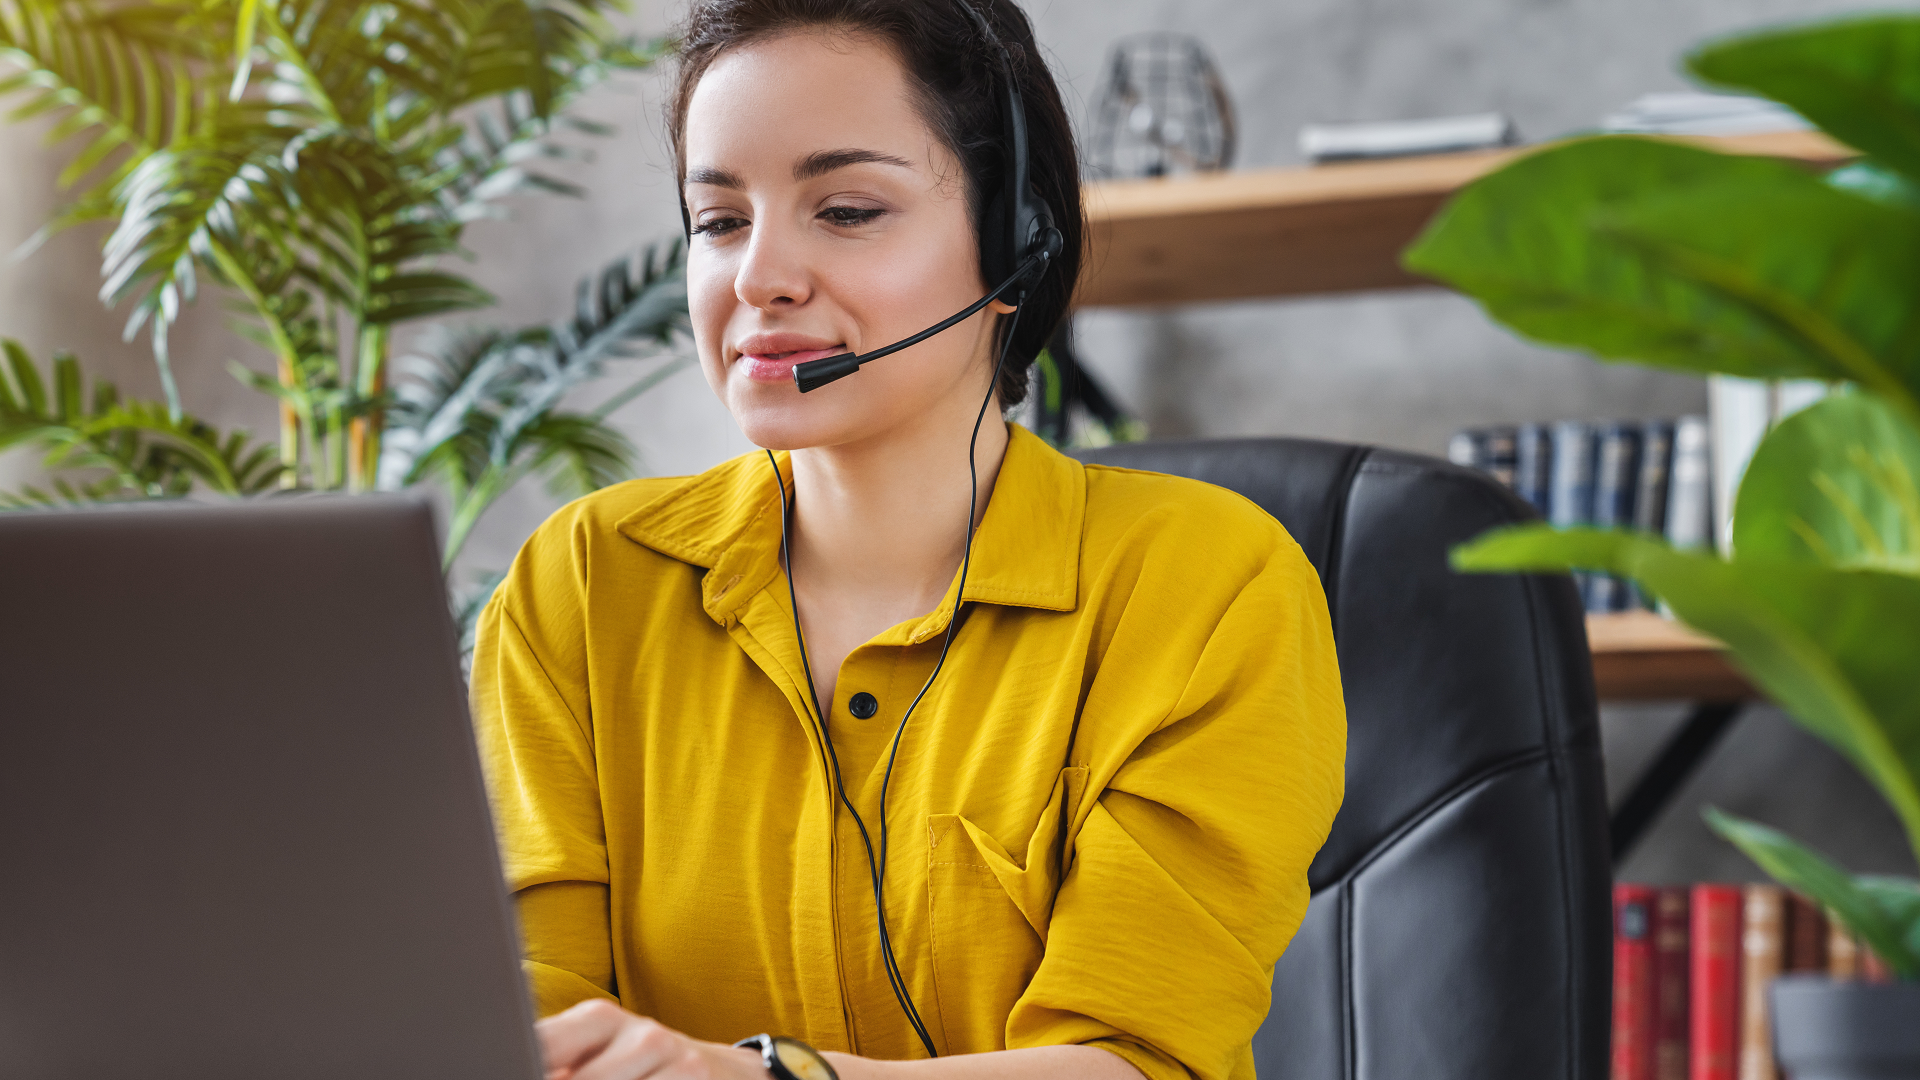 How WFM Scheduling Software Enables Flexible Contact Center Shifts